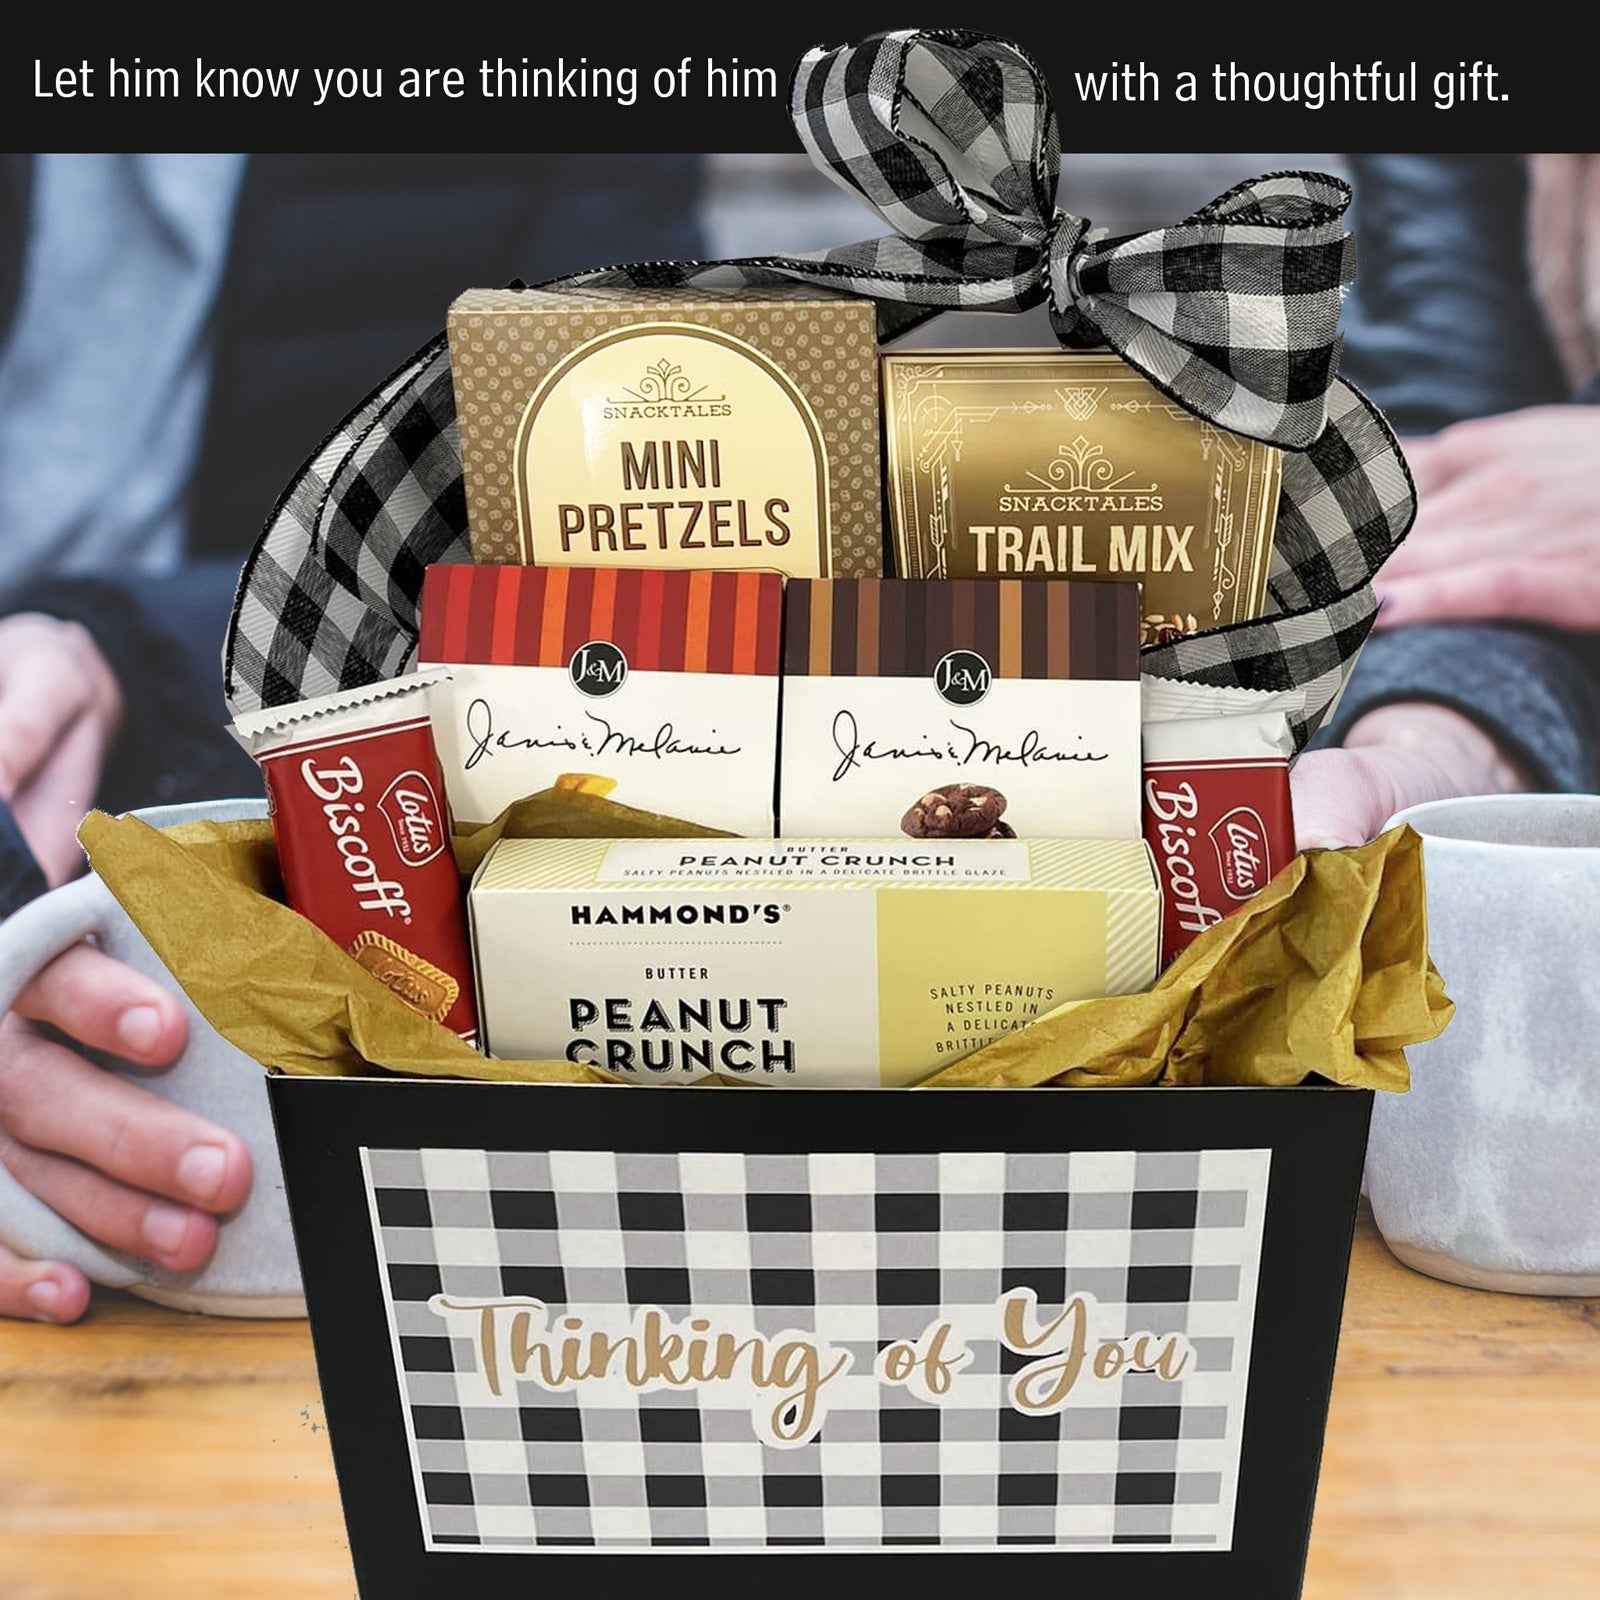 Men's Sympathy Gift Box Bereavement Gift for Sending Condolences on the Loss of a Loved One